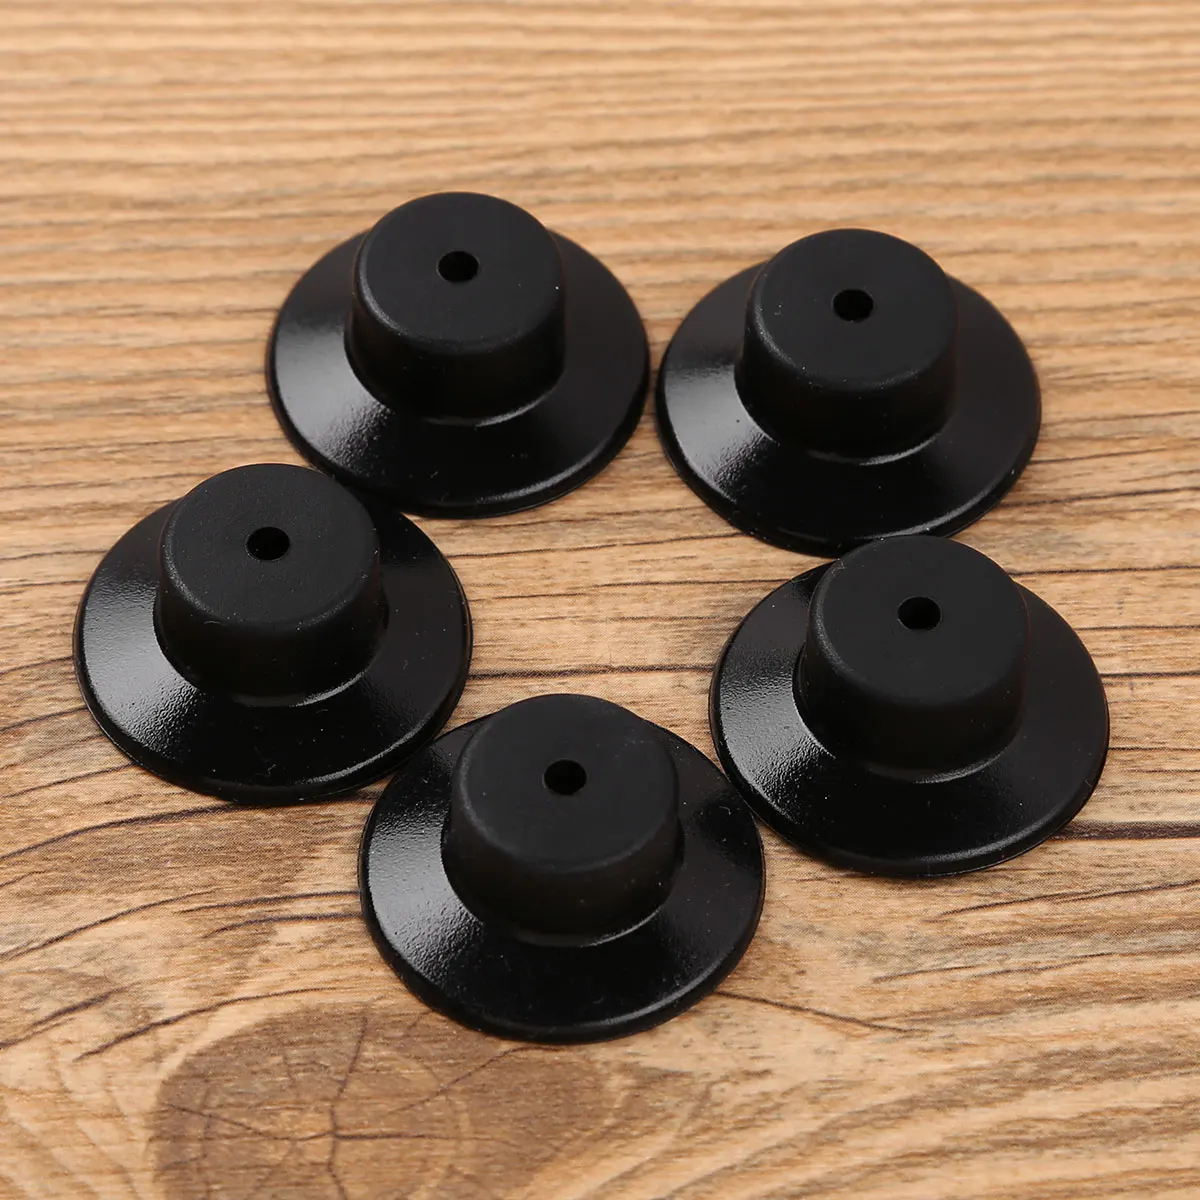 Details about   Anti-Slip Pads Replacement Foot Pad Vibration Isolator Air Compressors Protector 